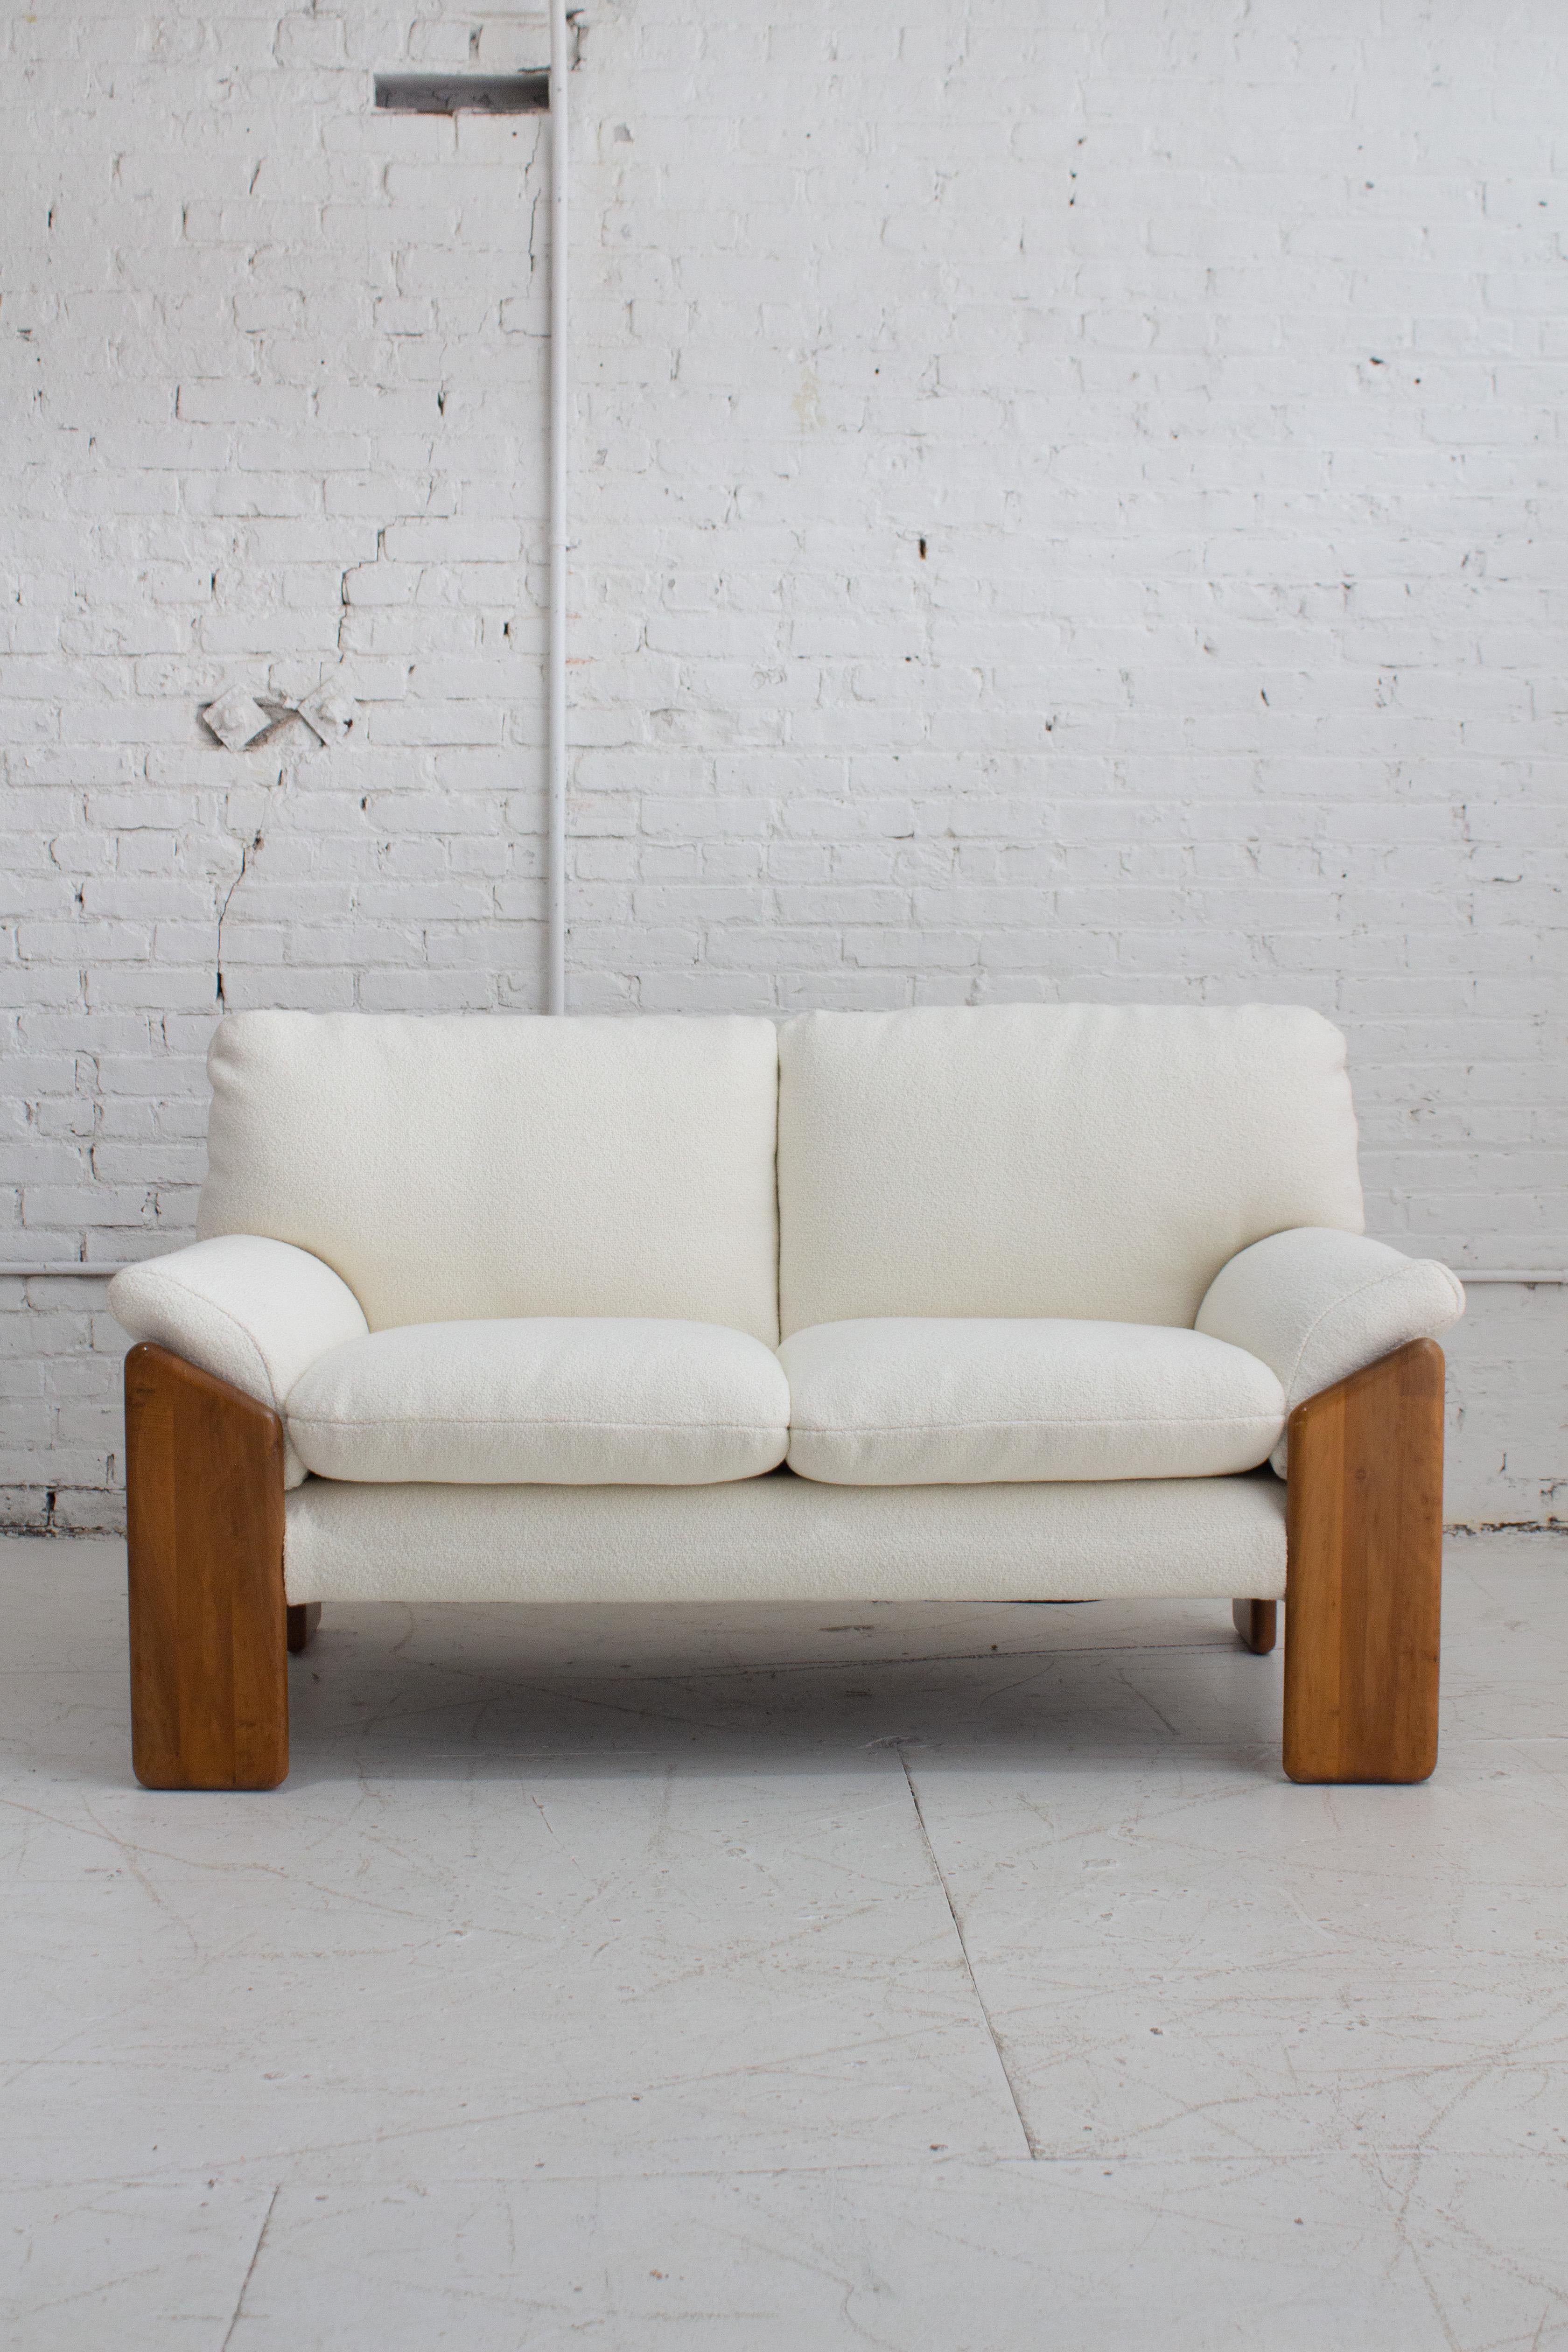 20th Century 'Sapporo' Wood Frame Two Seat Sofa by Mario Marenco for Mobil Girgi For Sale